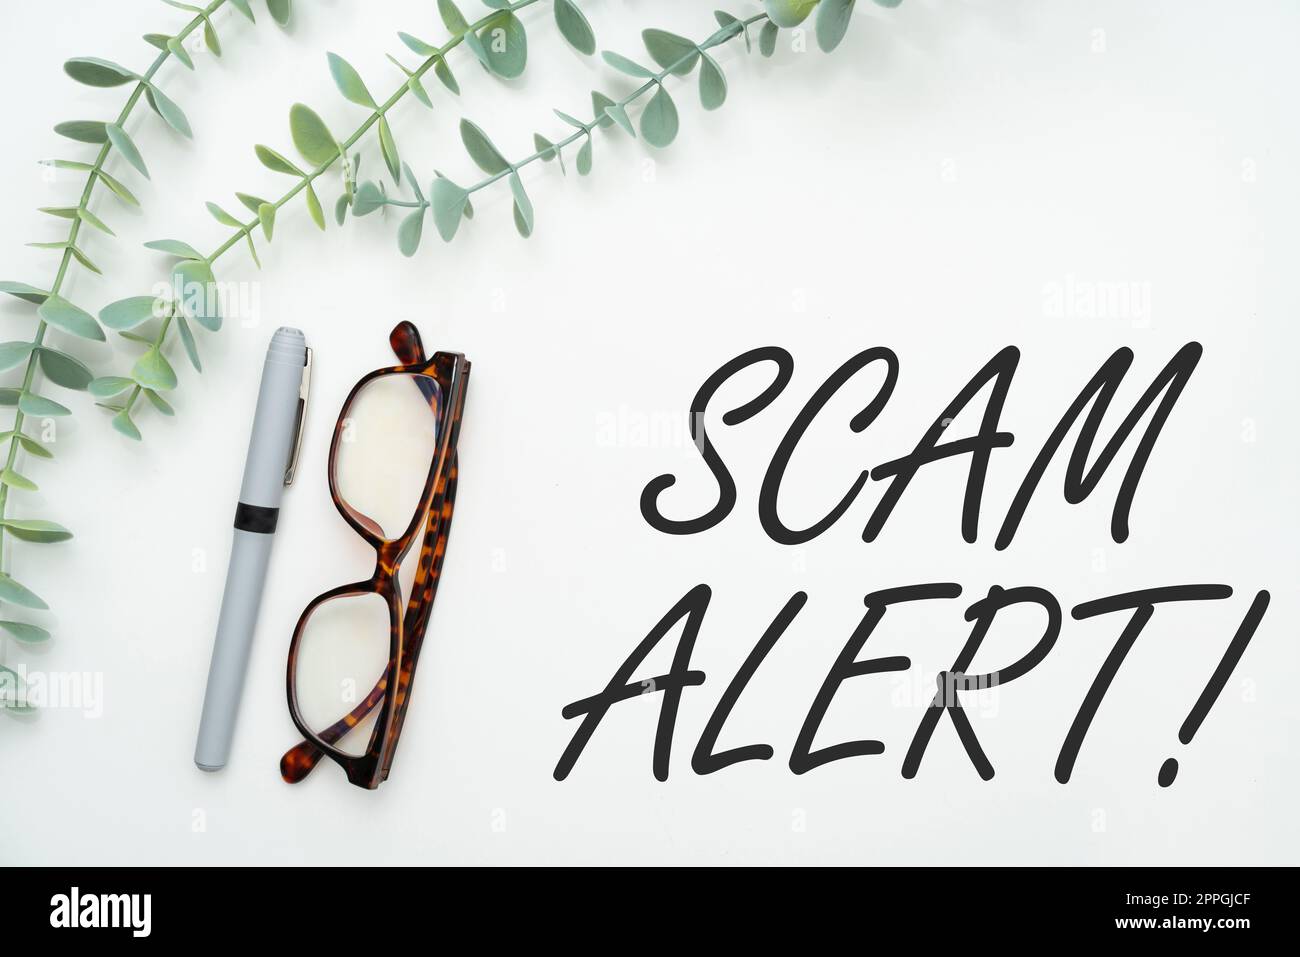 Sign displaying Scam Alert. Internet Concept warning someone about scheme or fraud notice any unusual Flashy School Office Supplies, Teaching Learning Collections, Writing Tools Stock Photo